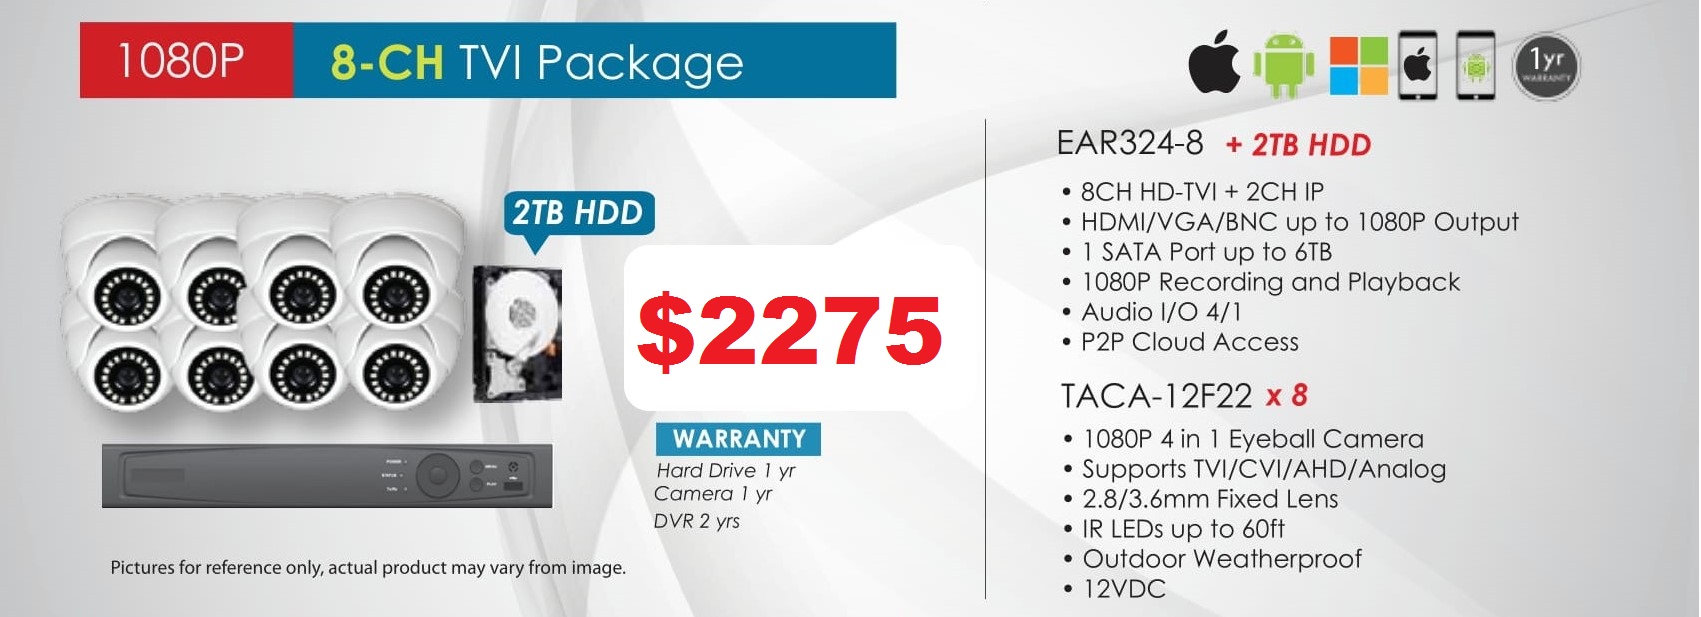 1080p-8ch-pack-2 New Promo Packages